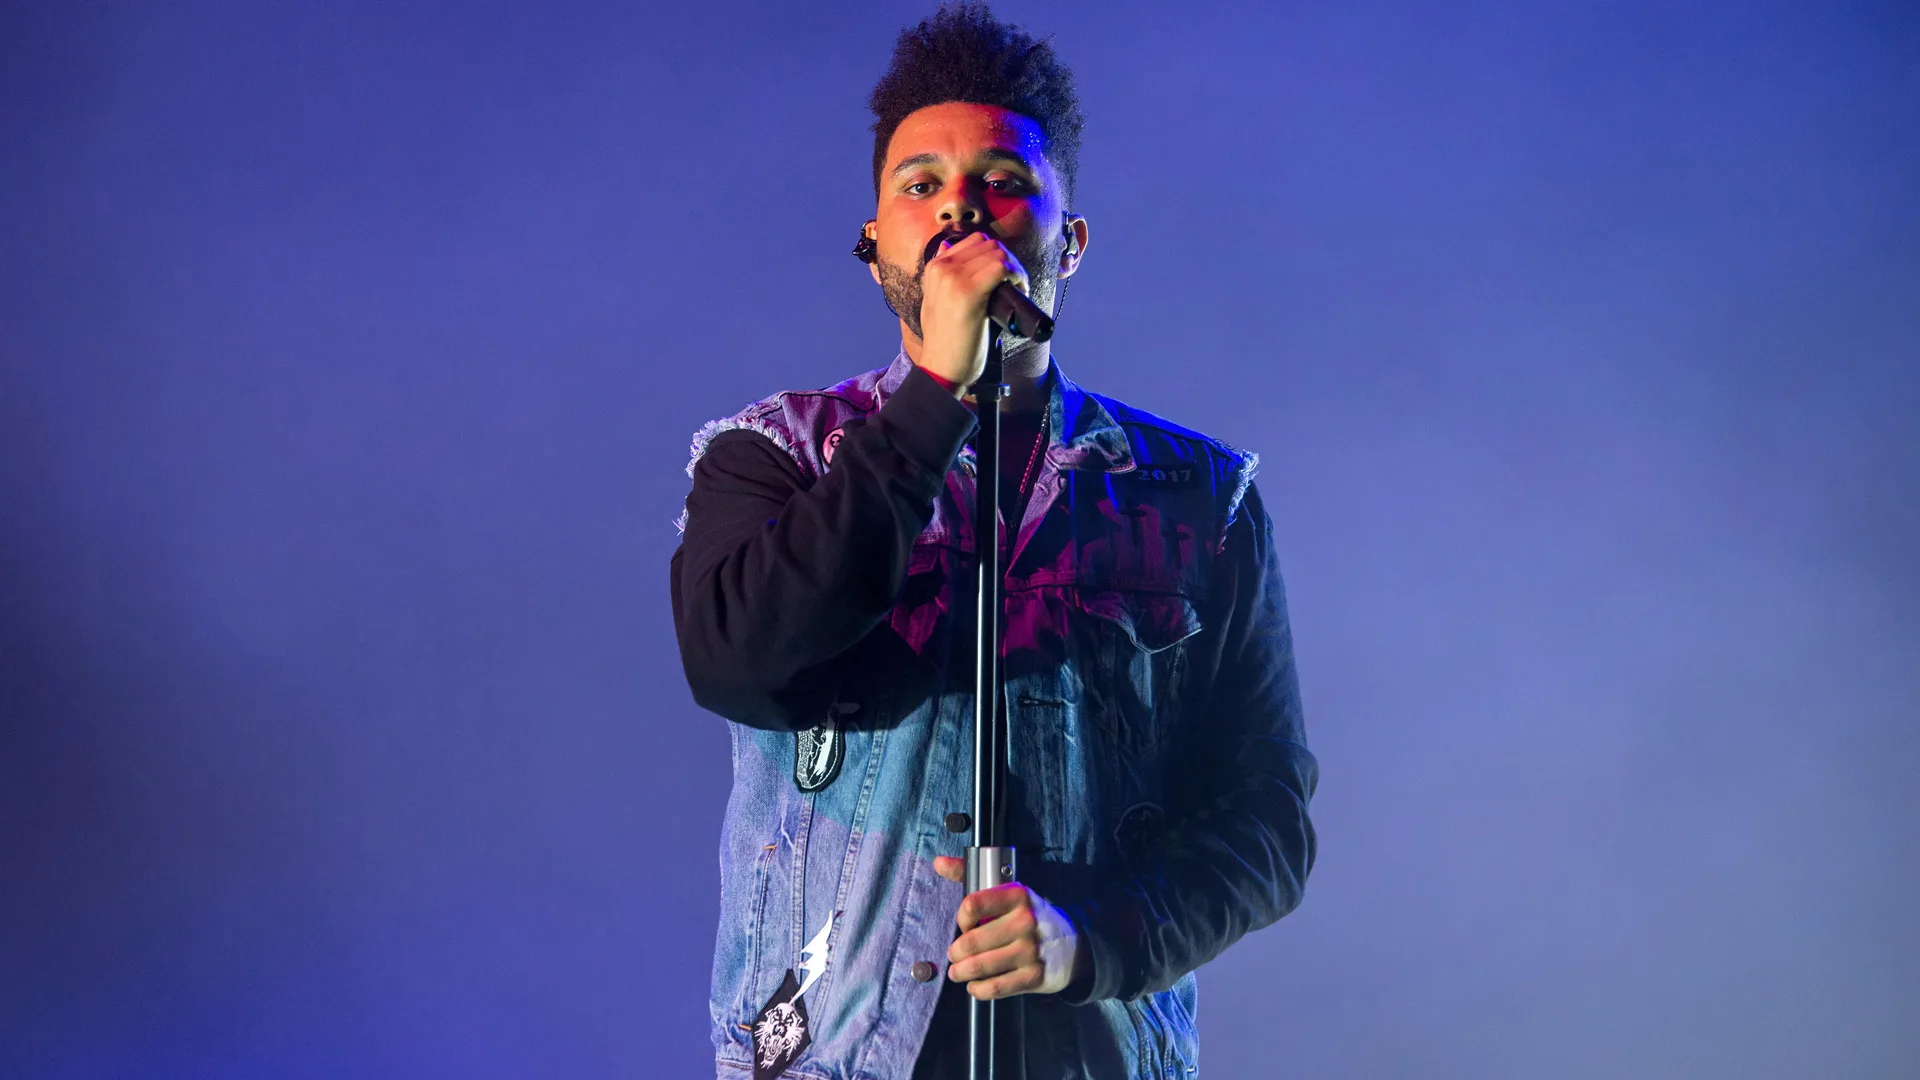 A photograph of the singer from The Weeknd holding the mic against a blue background